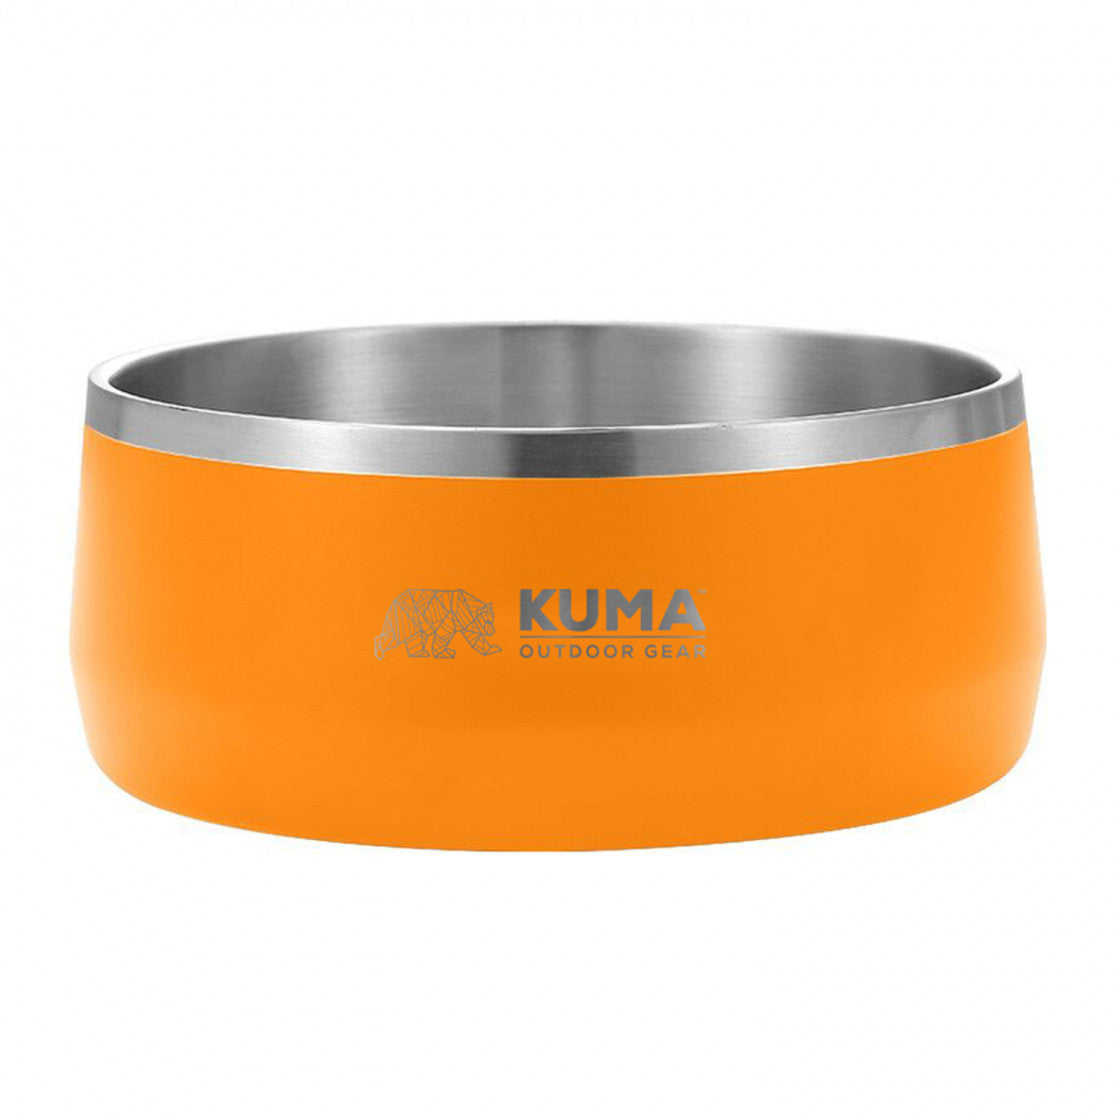 Stainless Steel Dog Bowl from Kuma